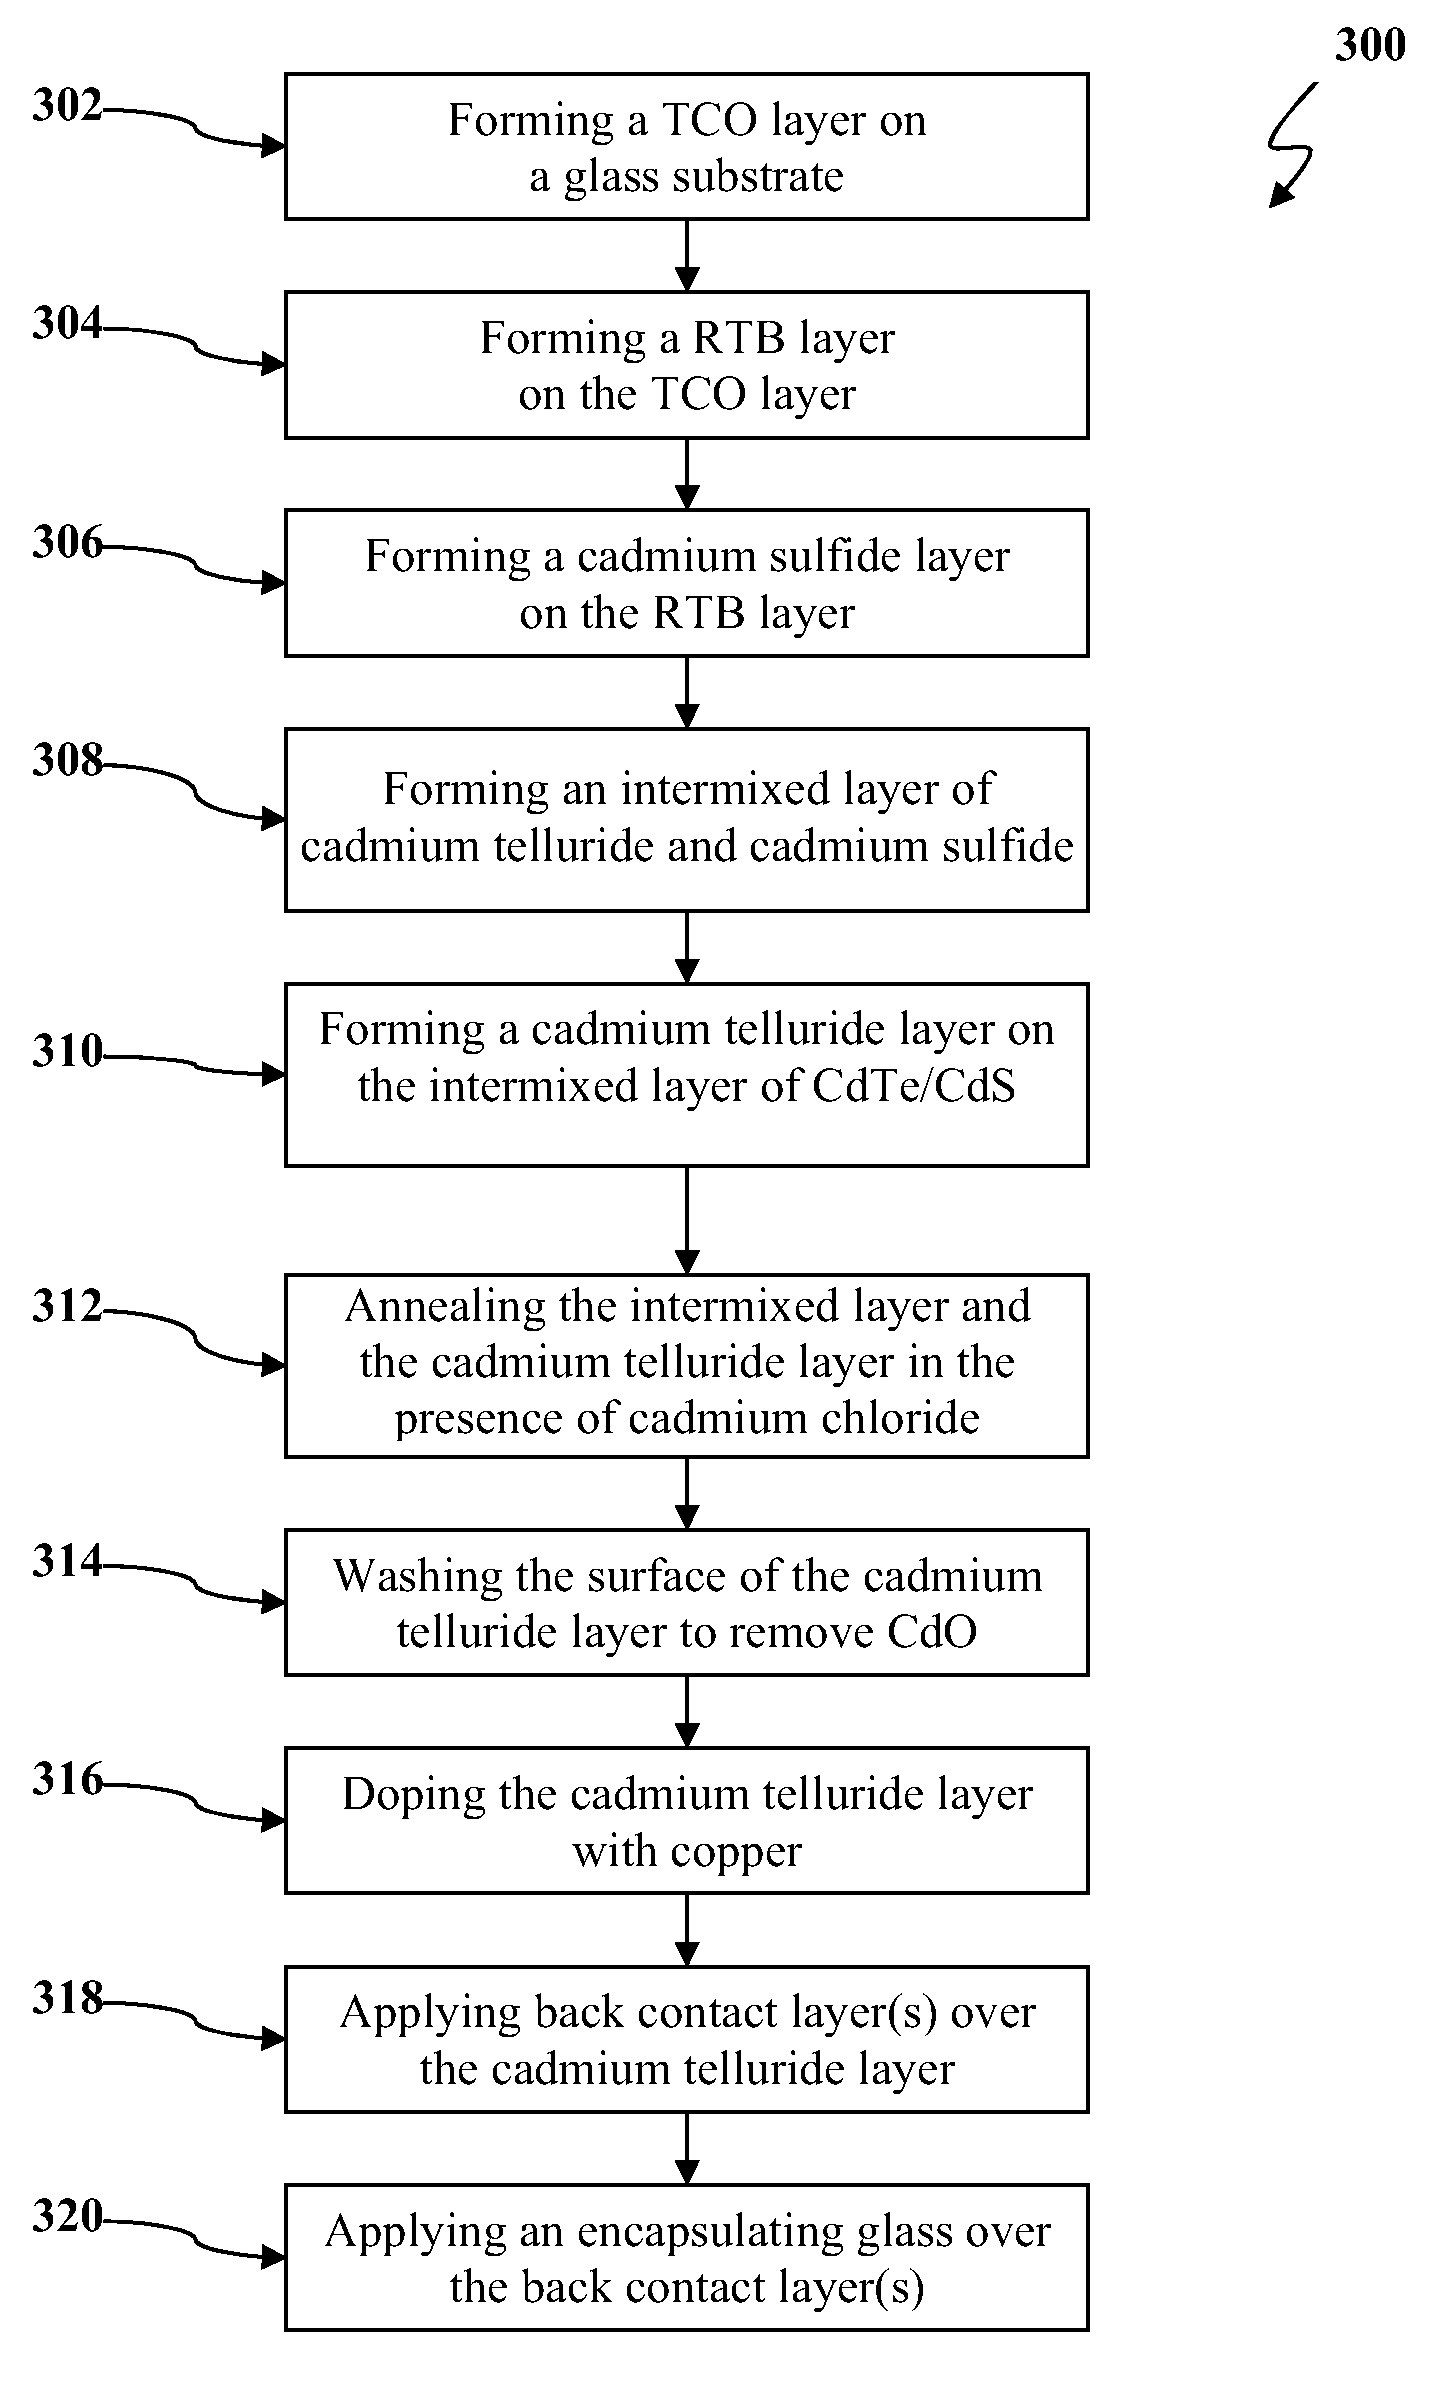 Systems and methods of intermixing cadmium sulfide layers and cadmium telluride layers for thin film photovoltaic devices